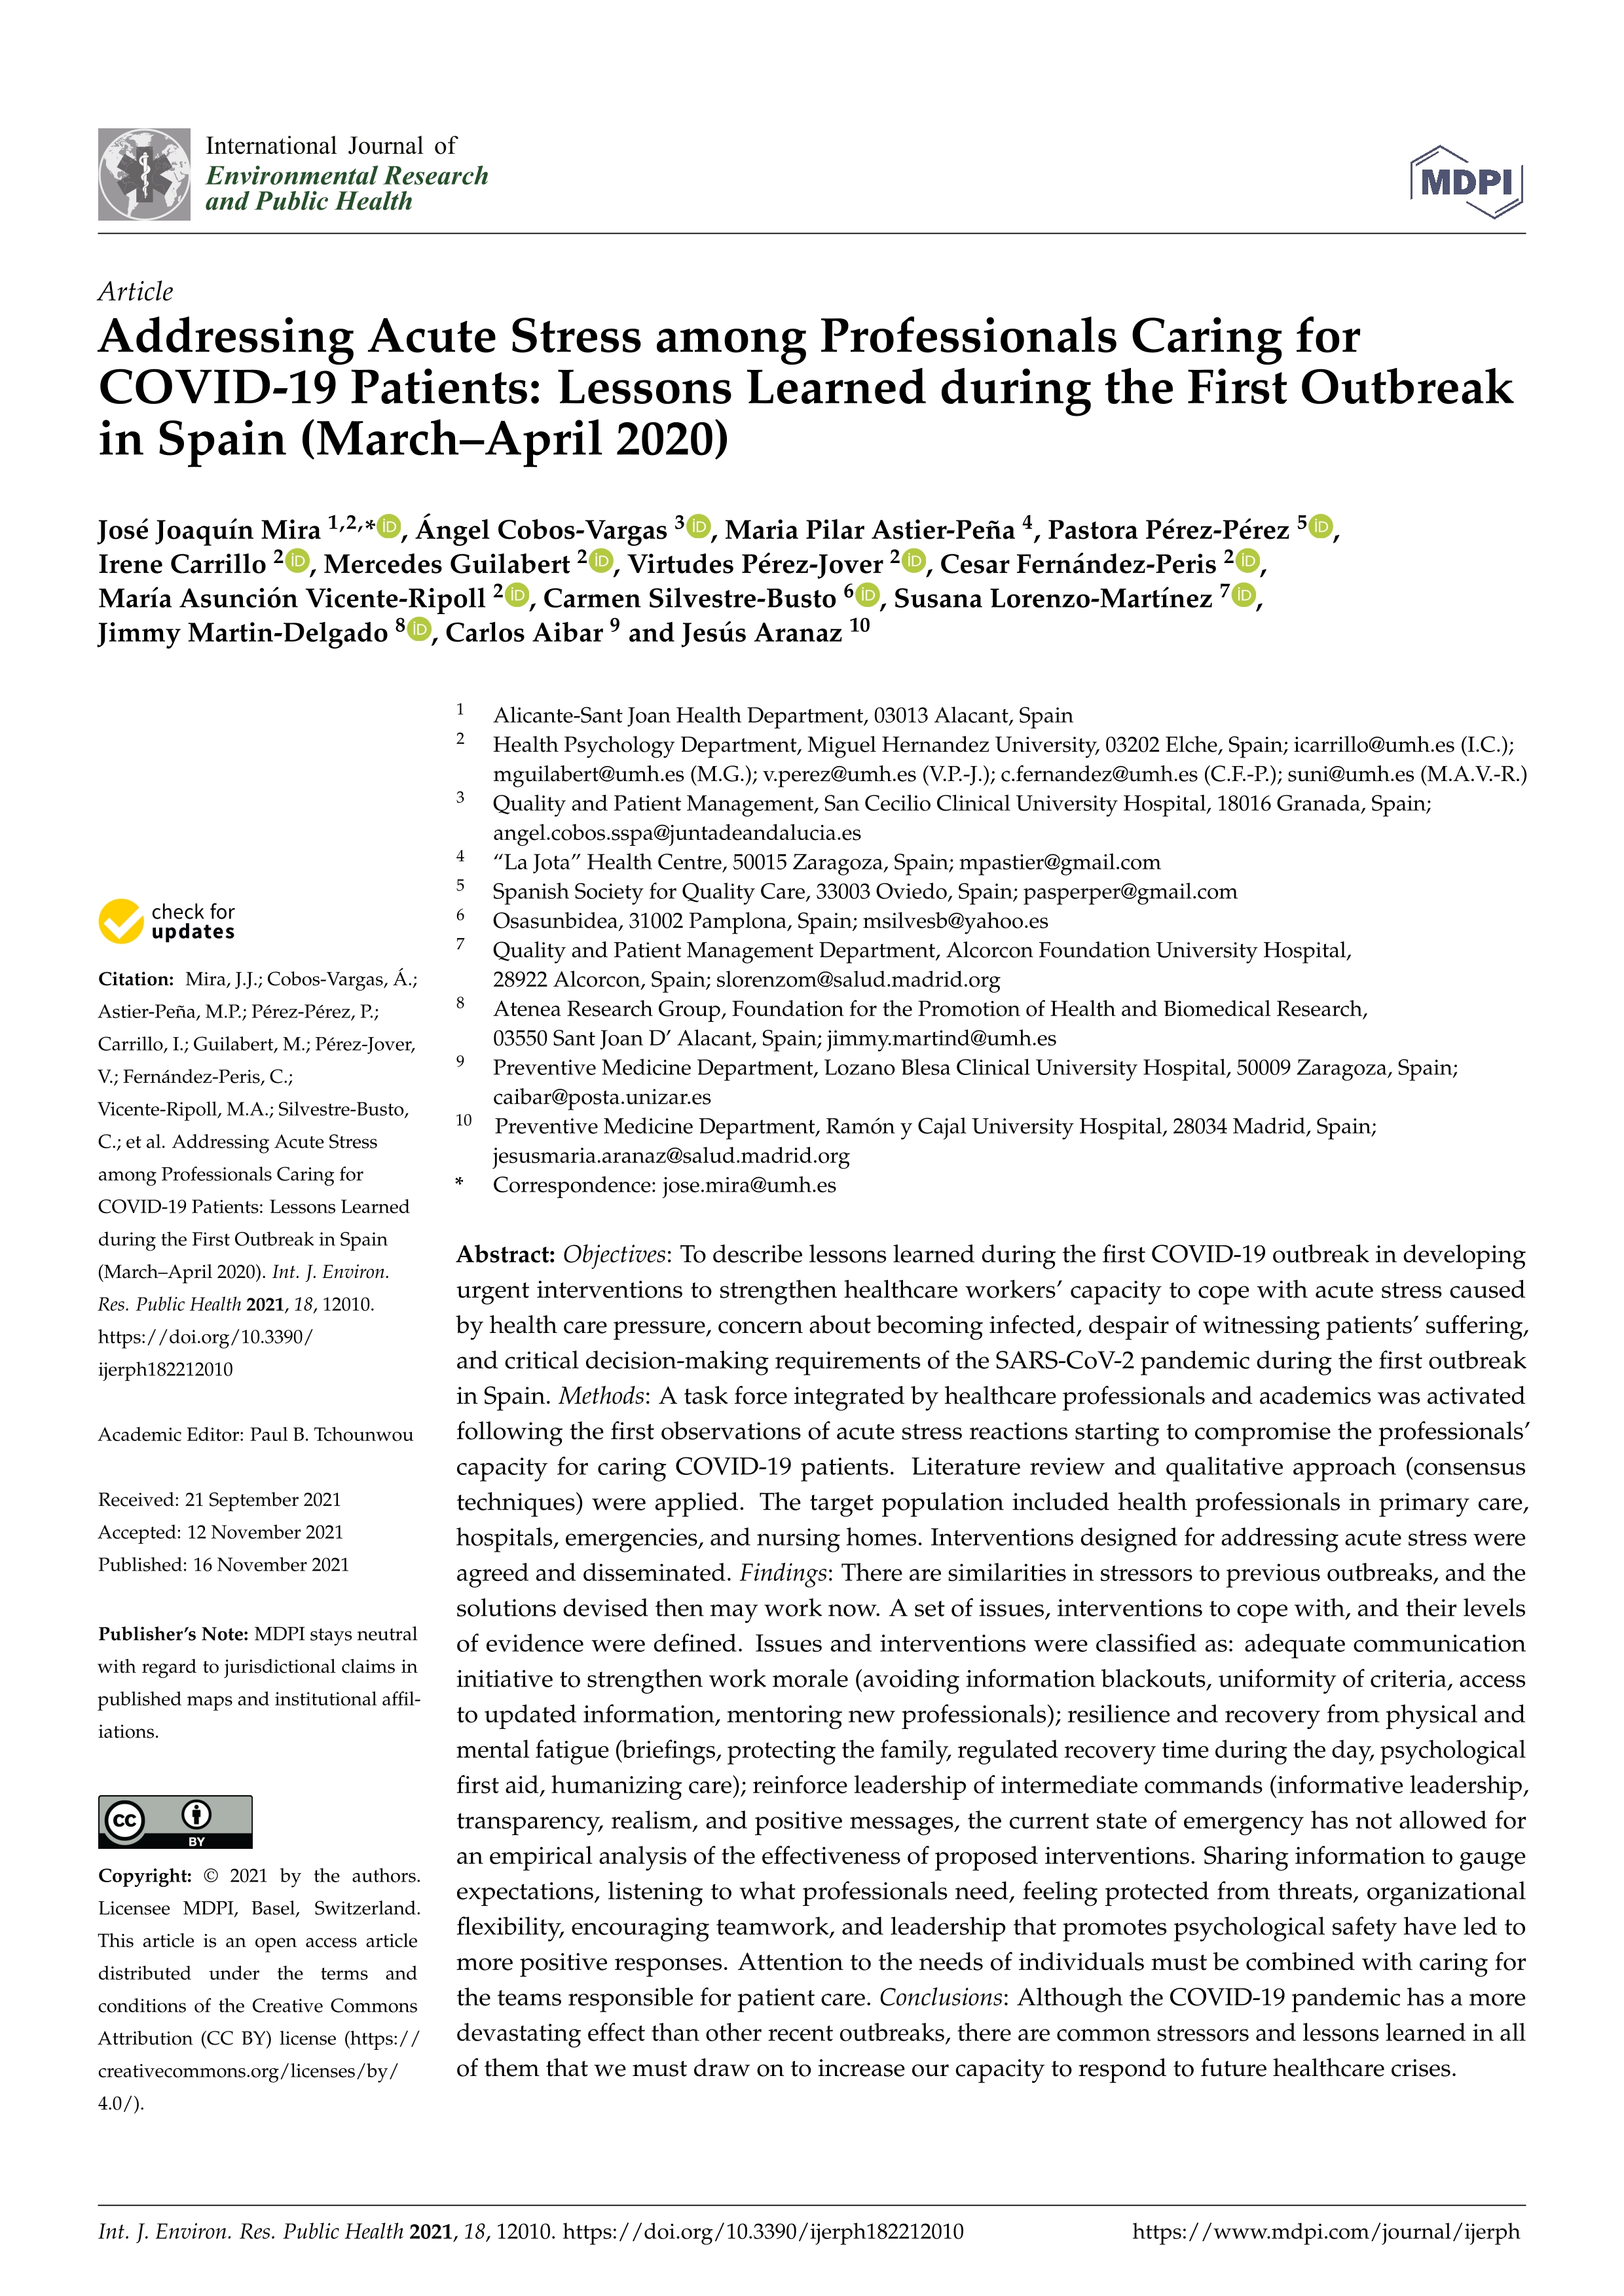 Addressing acute stress among professionals caring for COVID-19 patients: lessons learned during the first outbreak in Spain (March–April 2020)